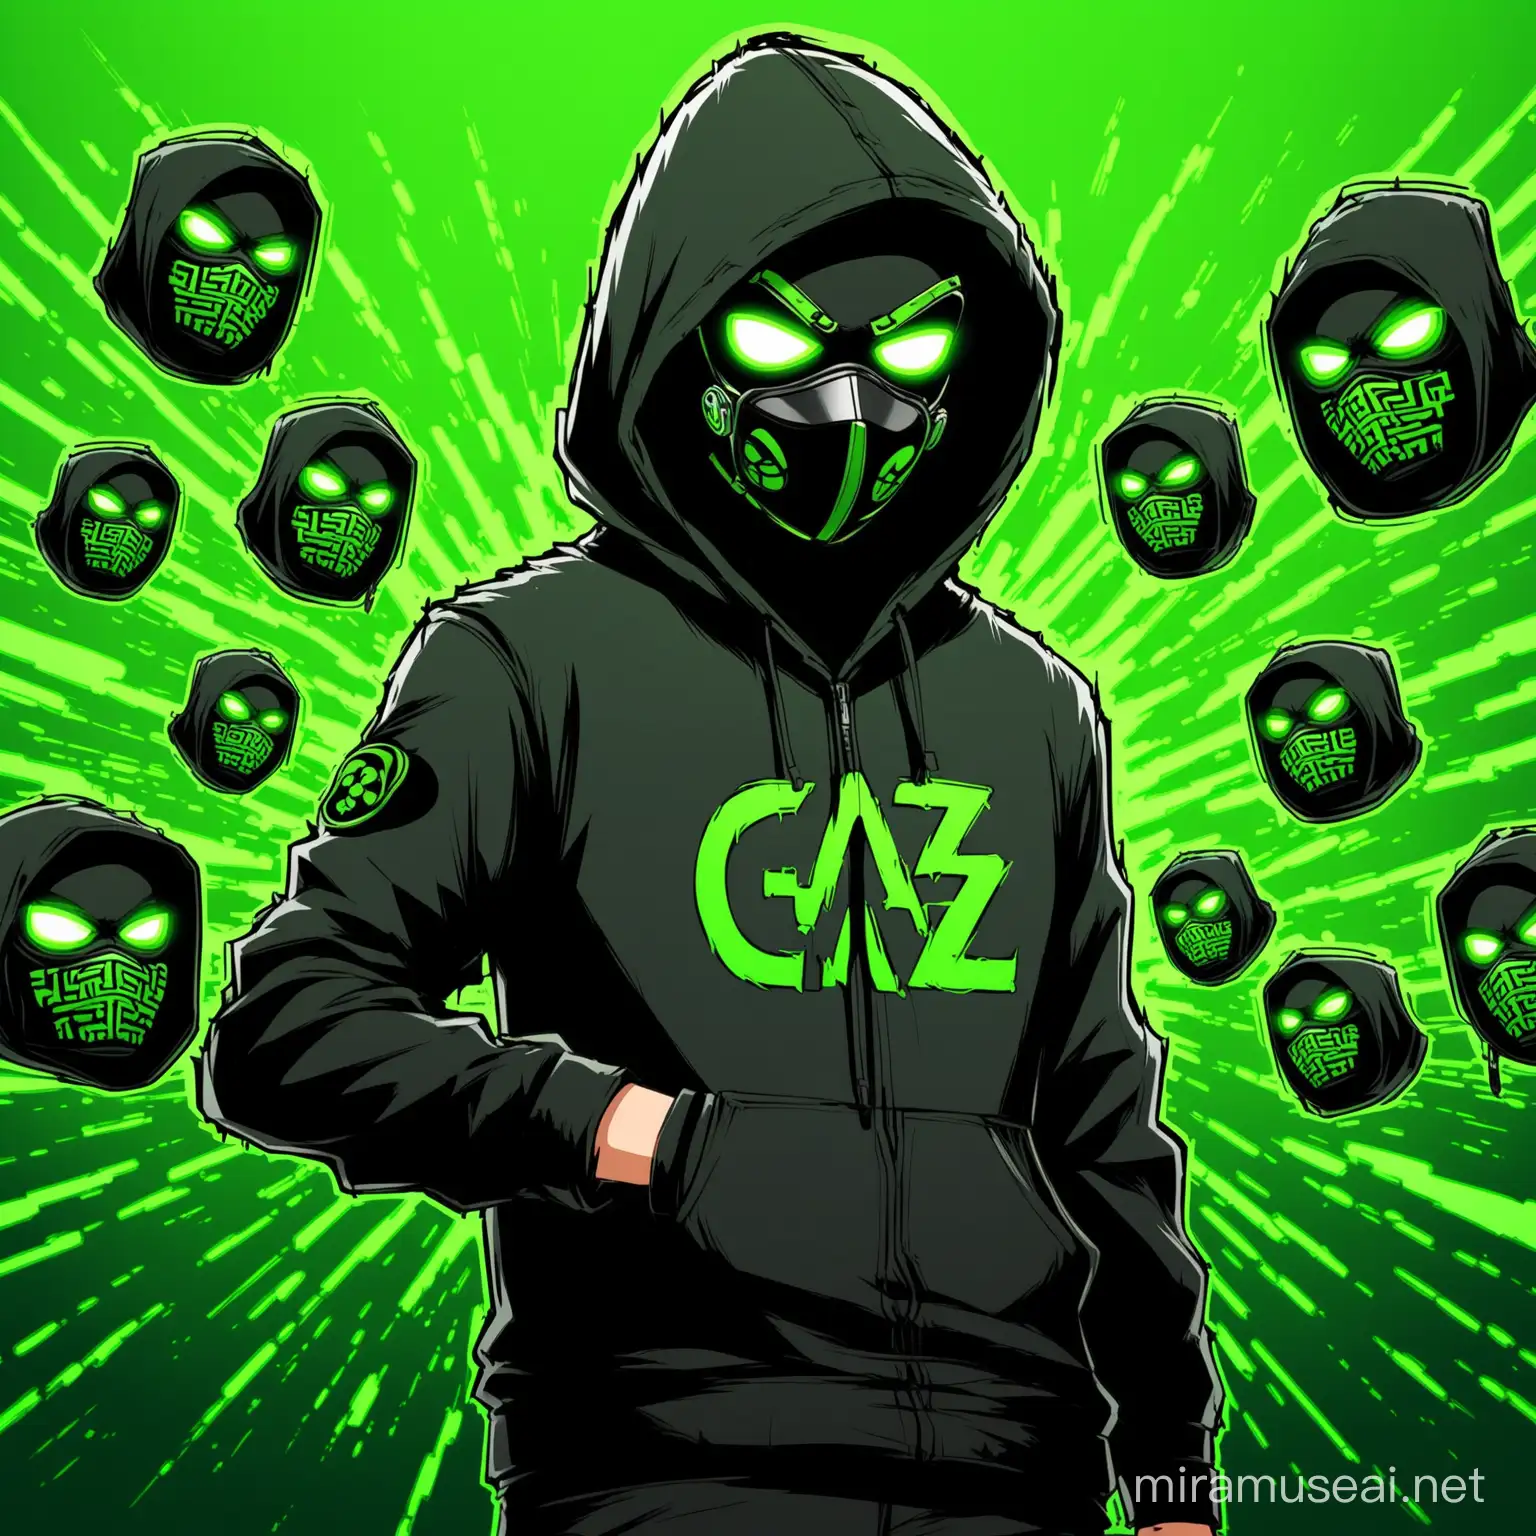 Cartoon Hacker in Black and Green with Gas Mask